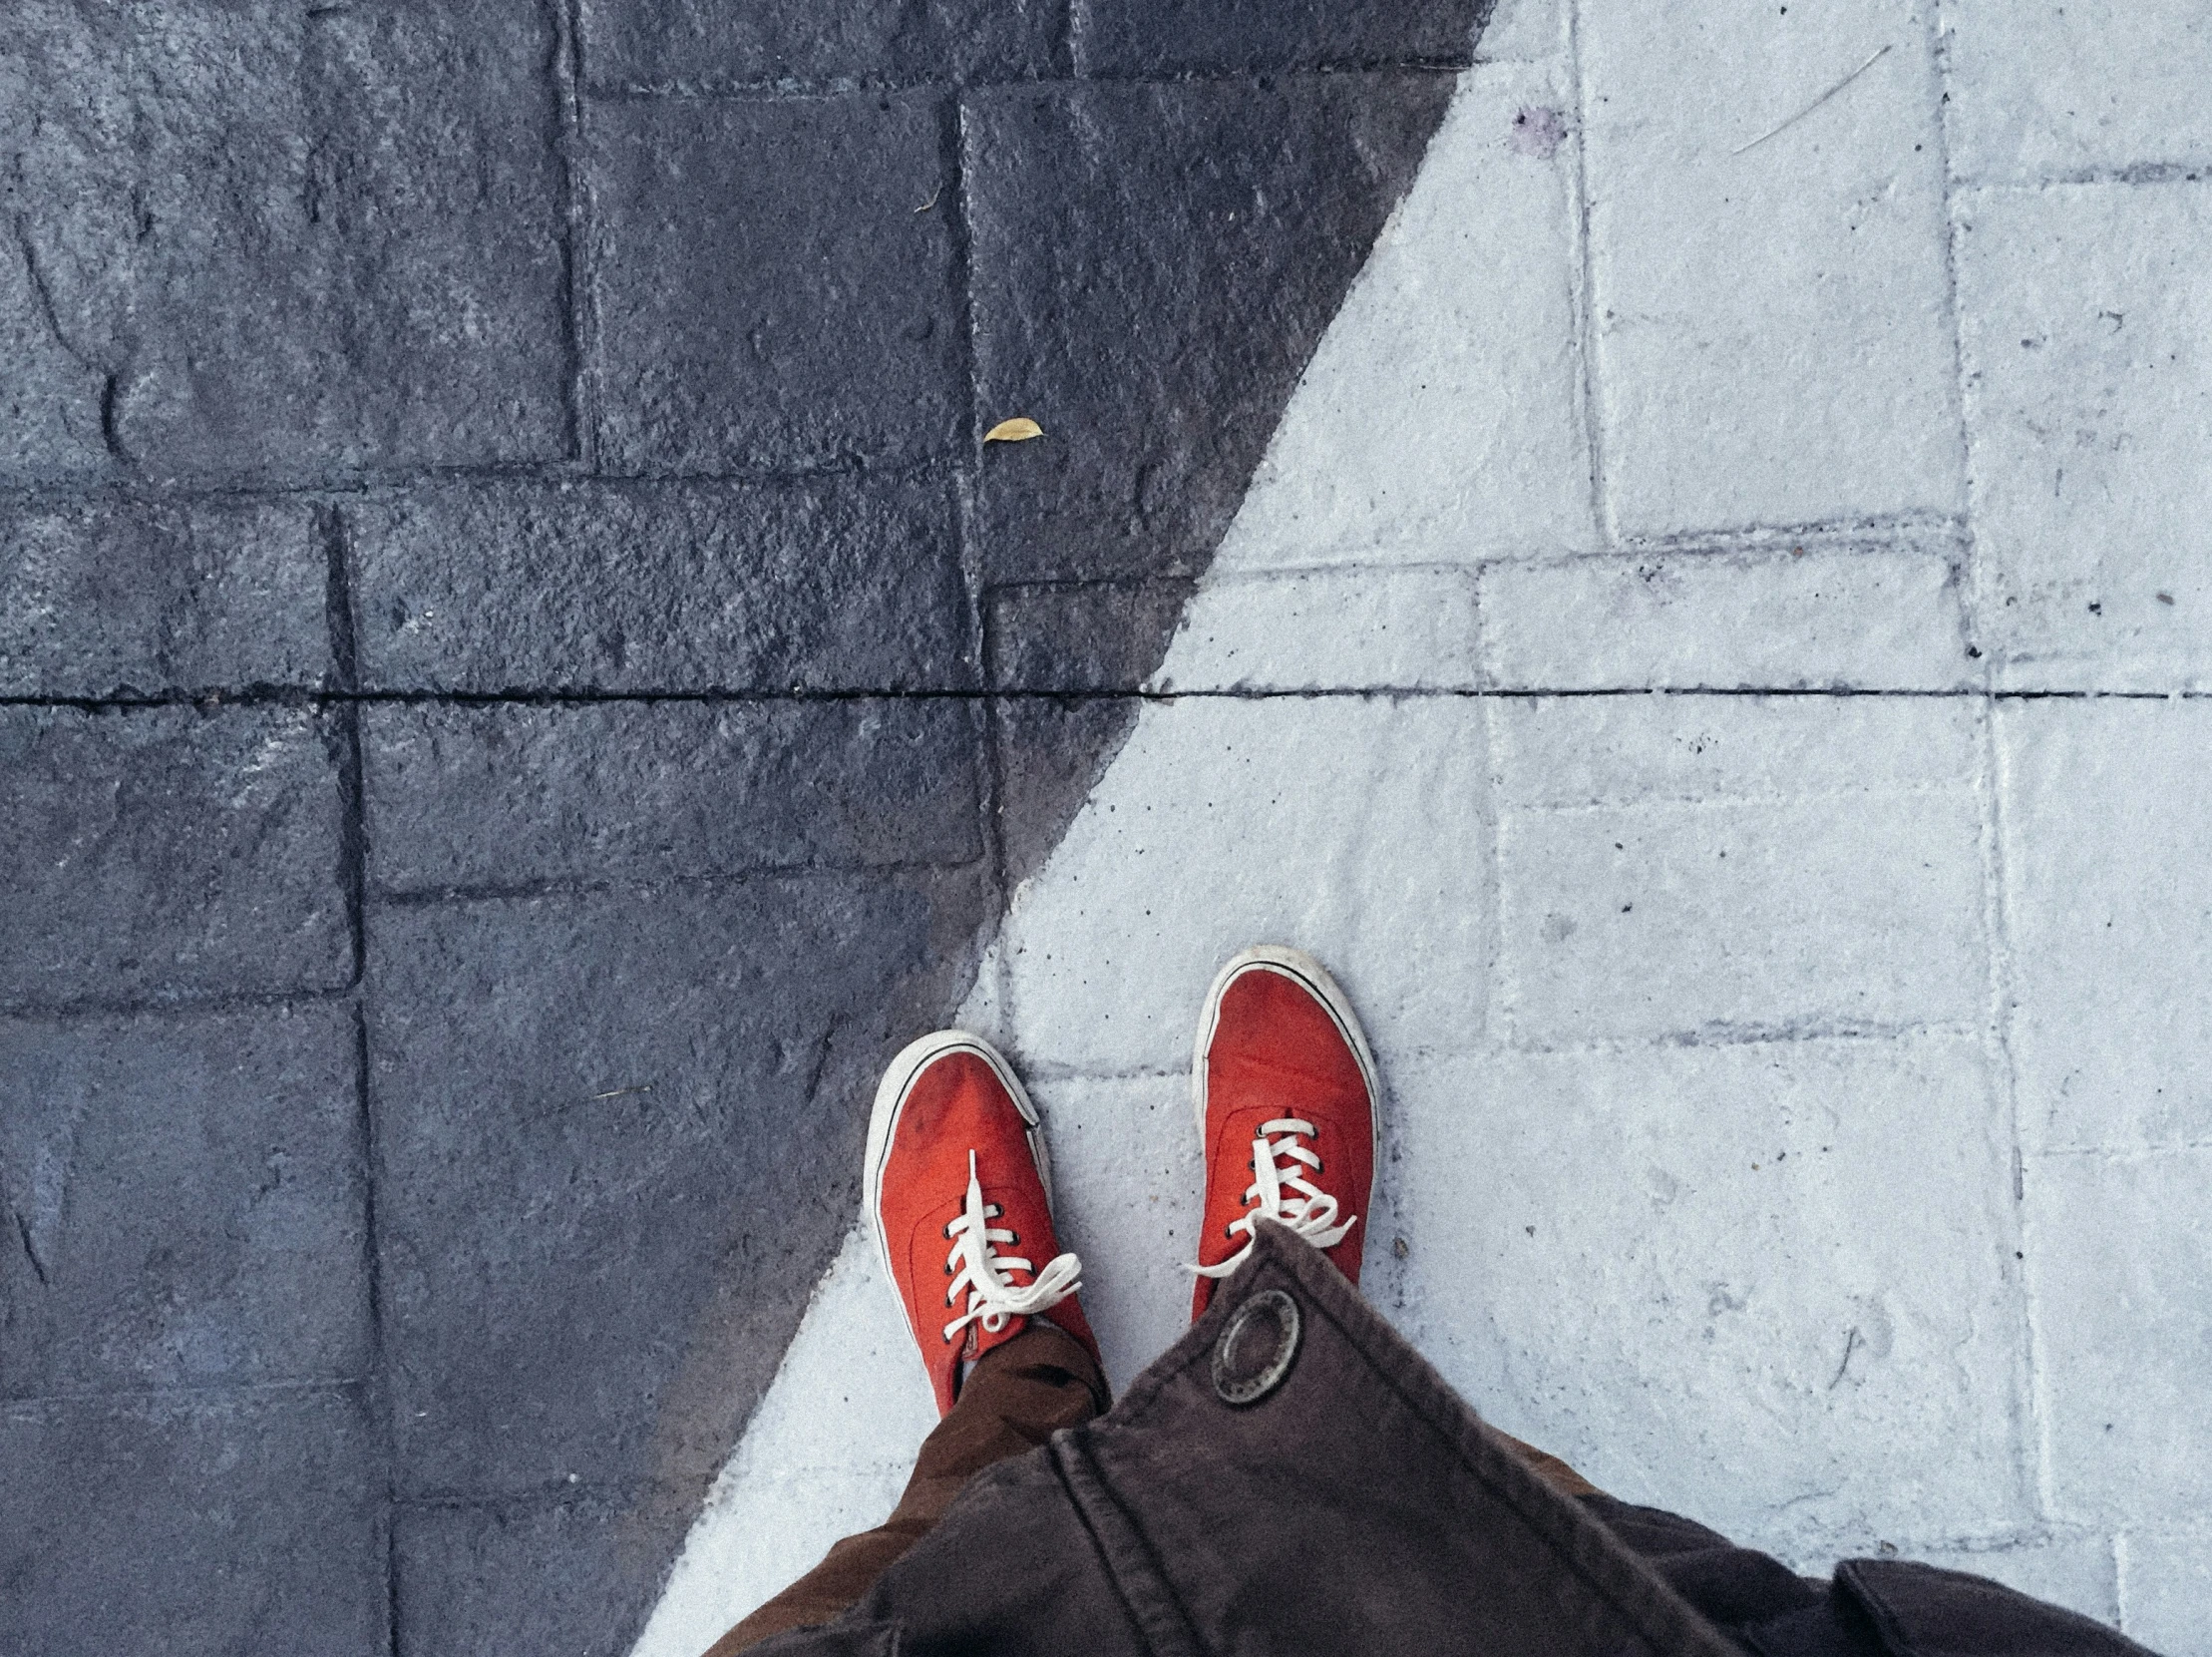 someone wearing red shoes and looking at the street